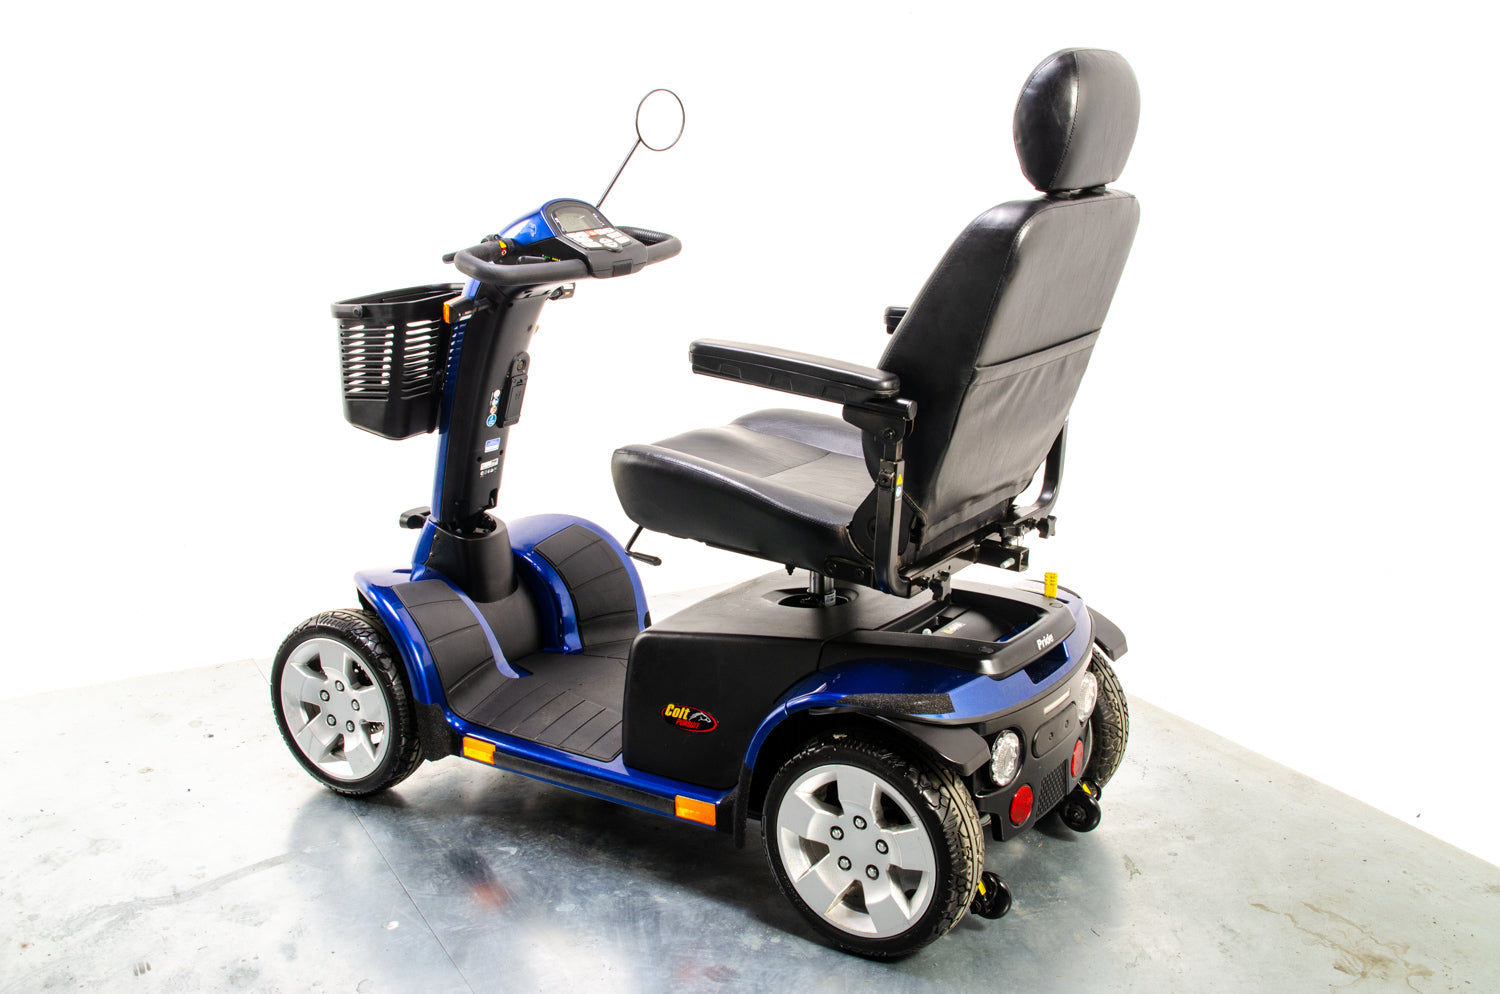 Pride Colt Pursuit All-Terrain Off-Road Used Mobility Scooter 8mph Transportable Large Off-Road Road Legal Blue 03527